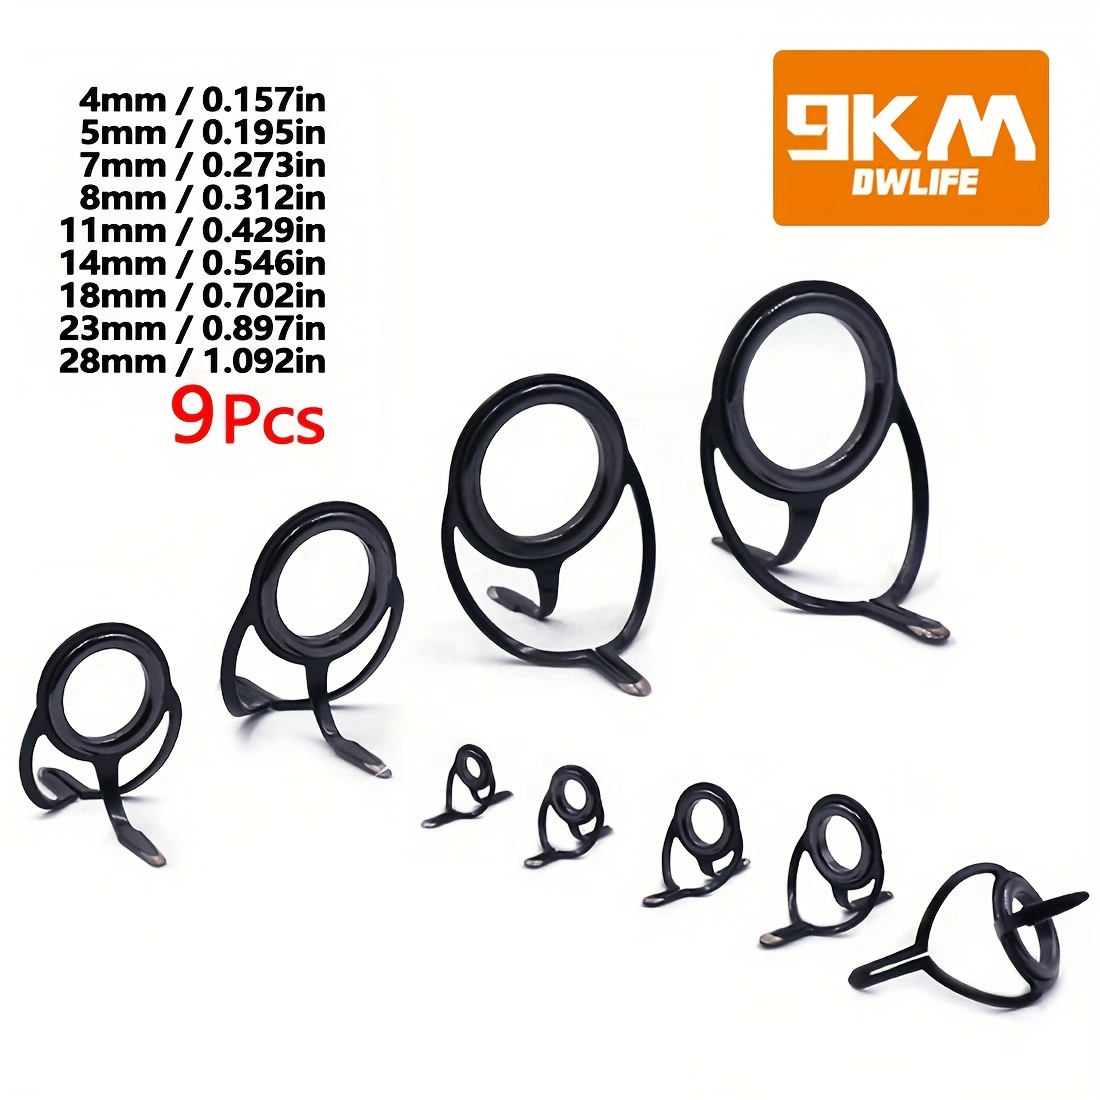 KL KT Guide Set 9pcs Rainbow Frame Blue Ring Fishing Rod Building Component  Repair DIY Accessory